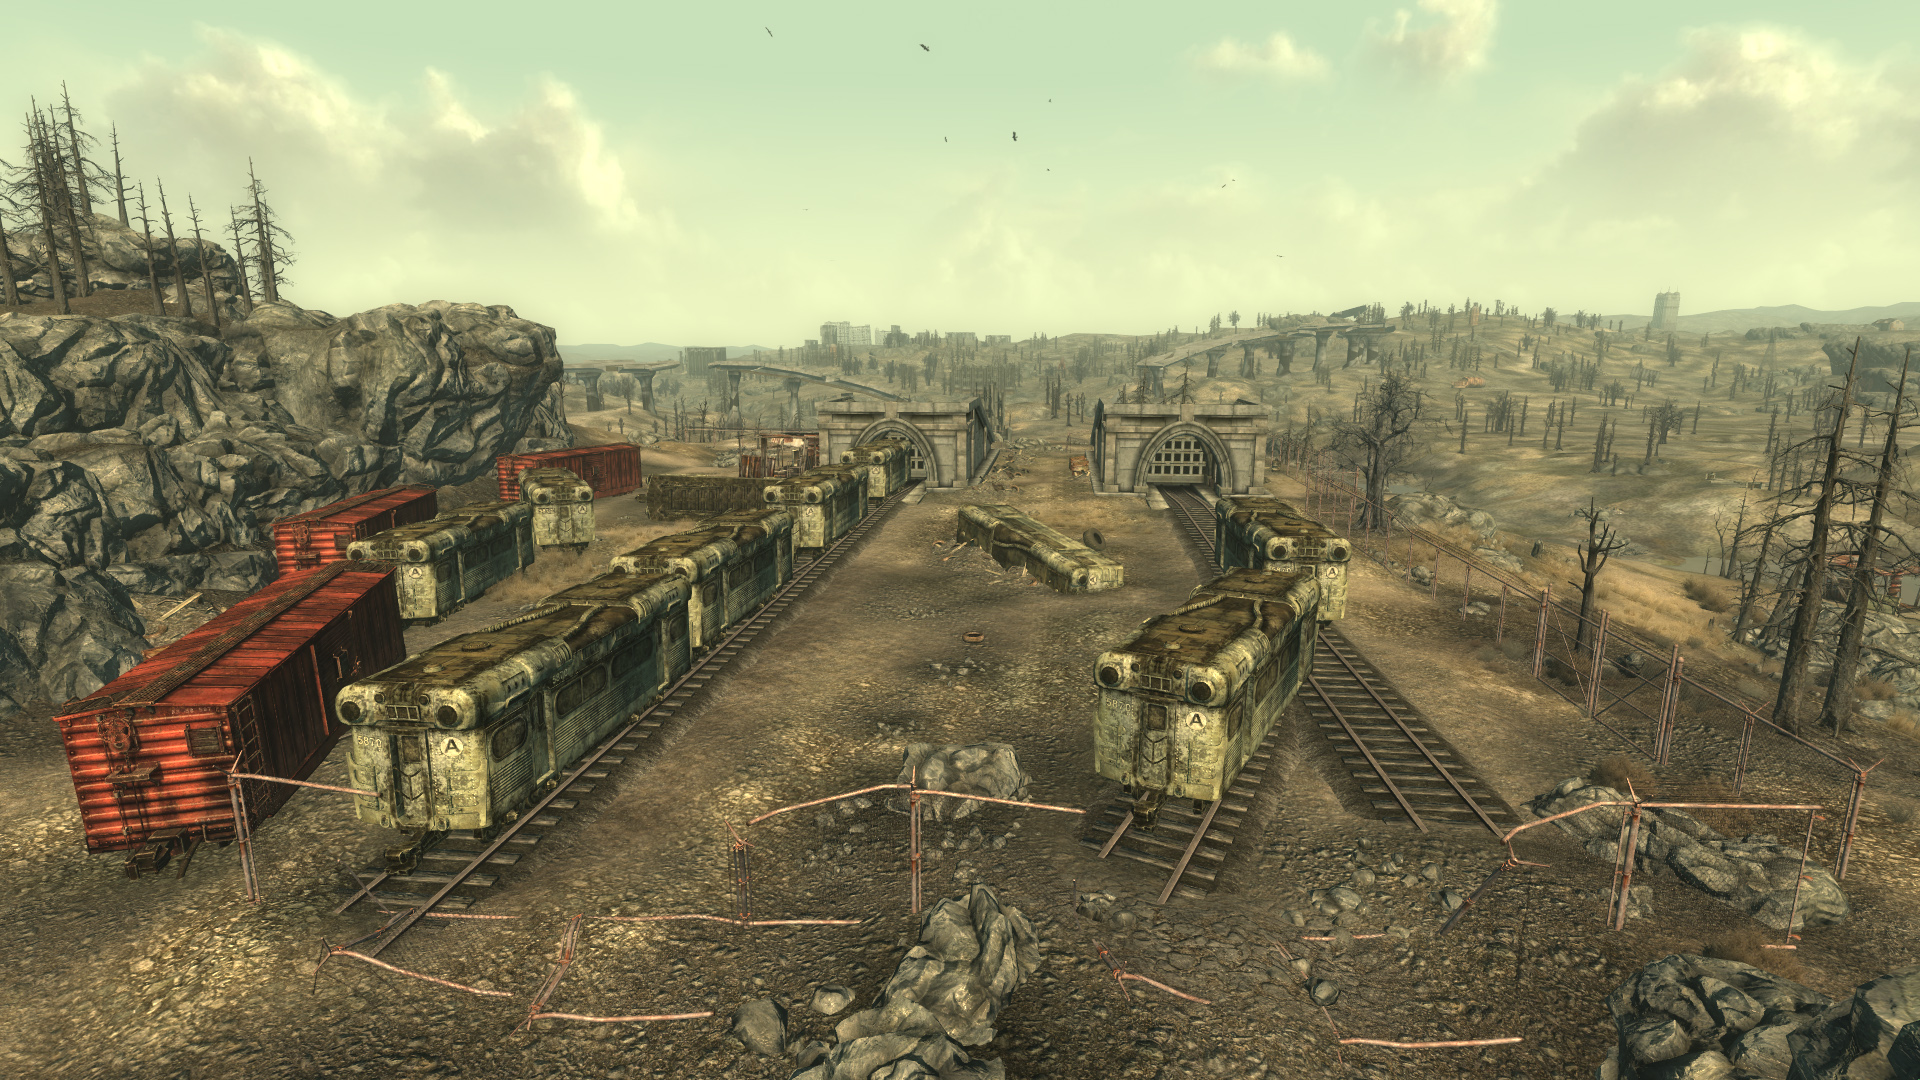 Free download abandoned train yards HD wallpaper for your desktop